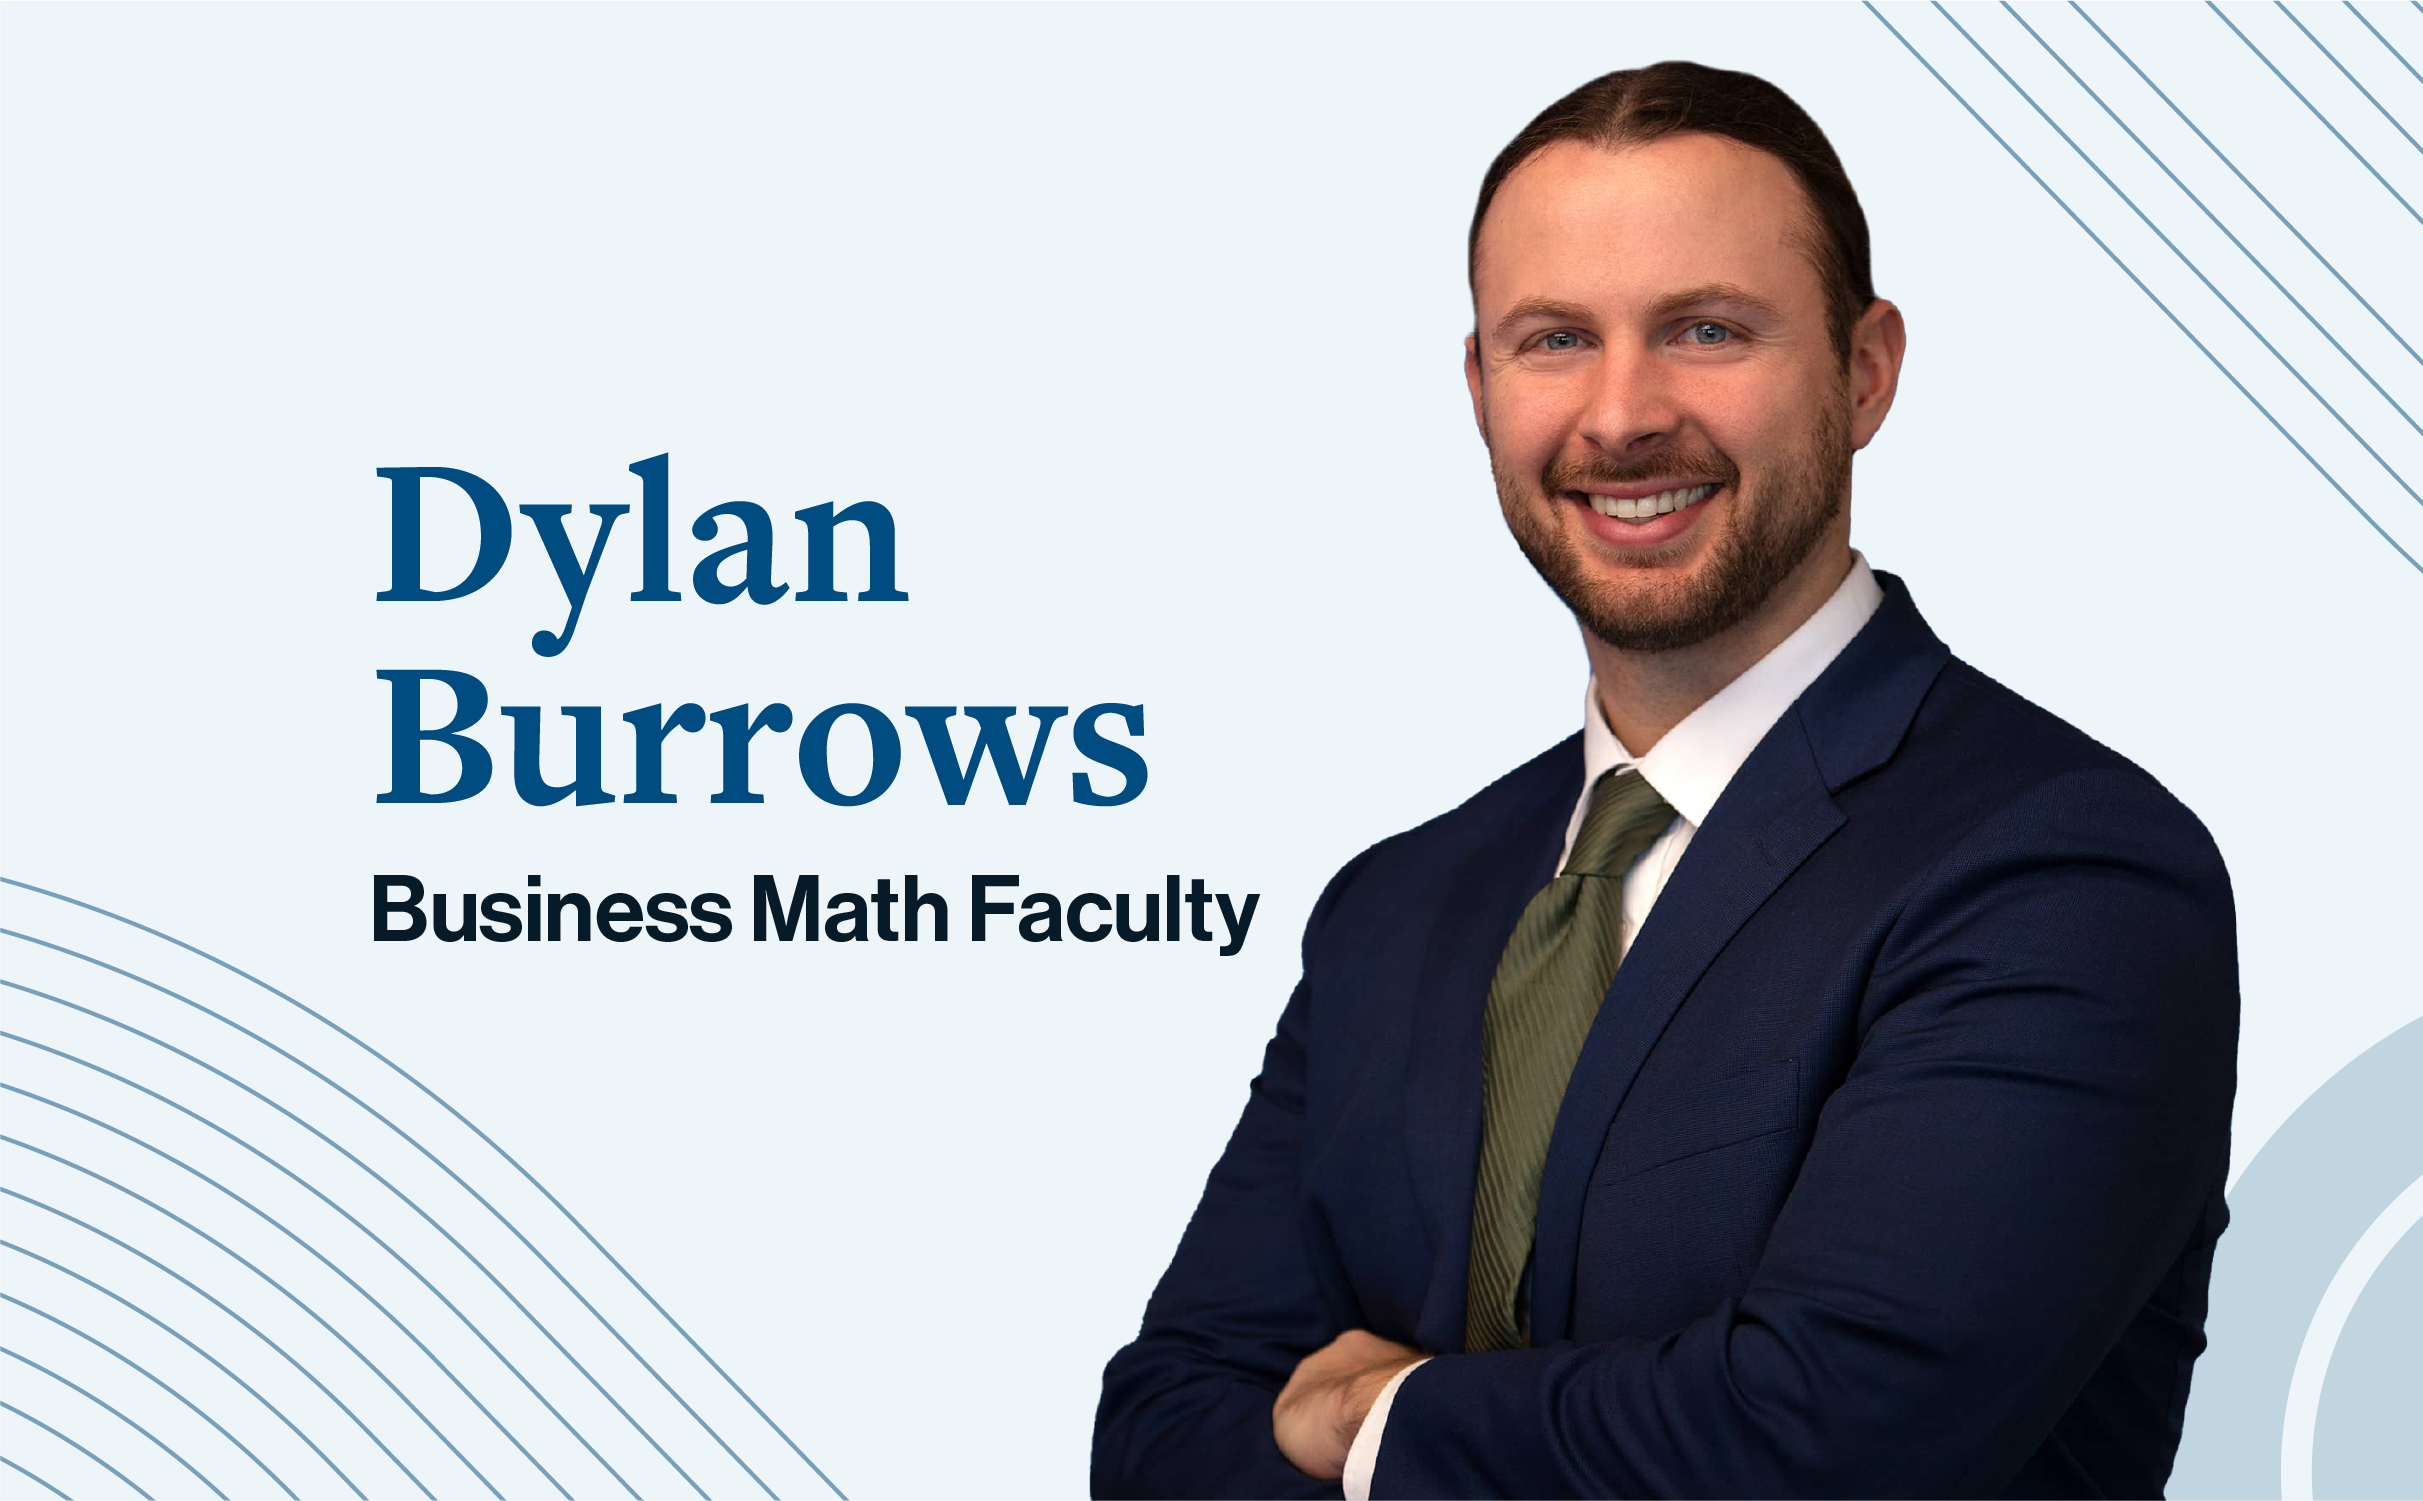 Faculty & Staff Feature: Meet Dylan Burrows